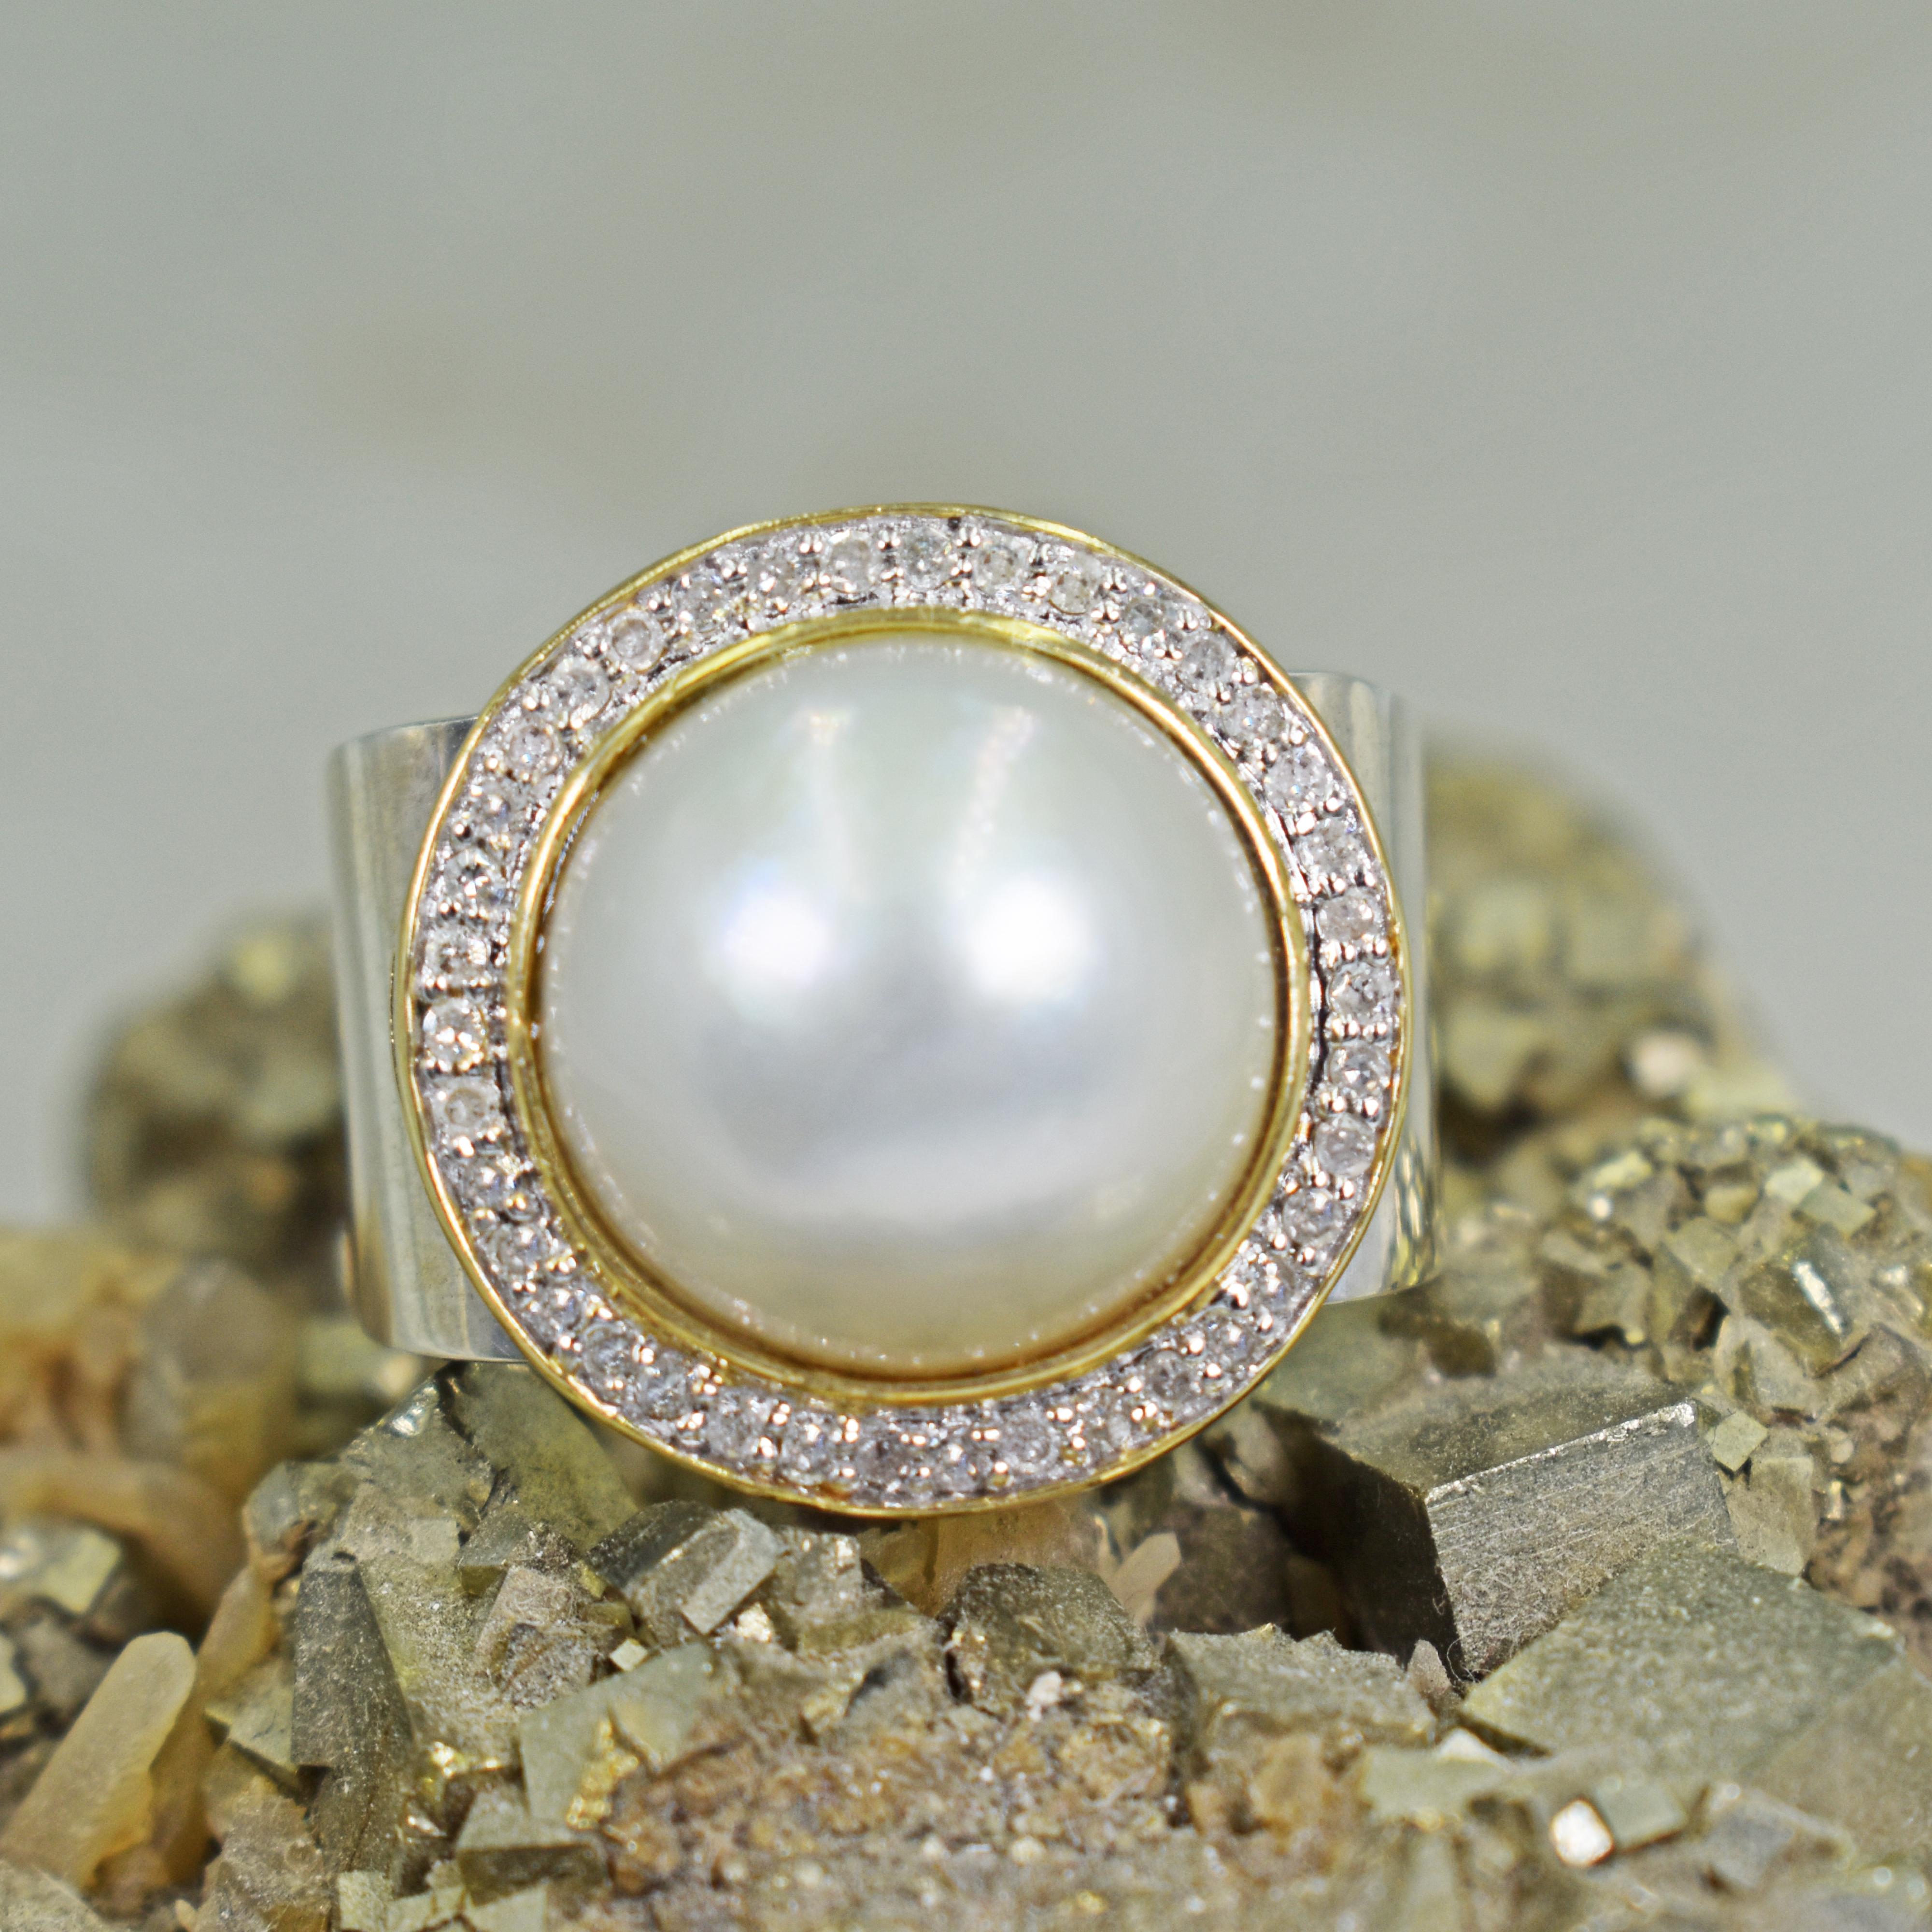 Beautiful, white Mabé Pearl set in 14k yellow gold and diamond halo on a square, tapered sterling silver ring band. Size 7. Base of ring band is 0.38 inch wide, and top of ring band is 0.50 inch wide. Pearl halo 14k gold top measures 0.75 inch in